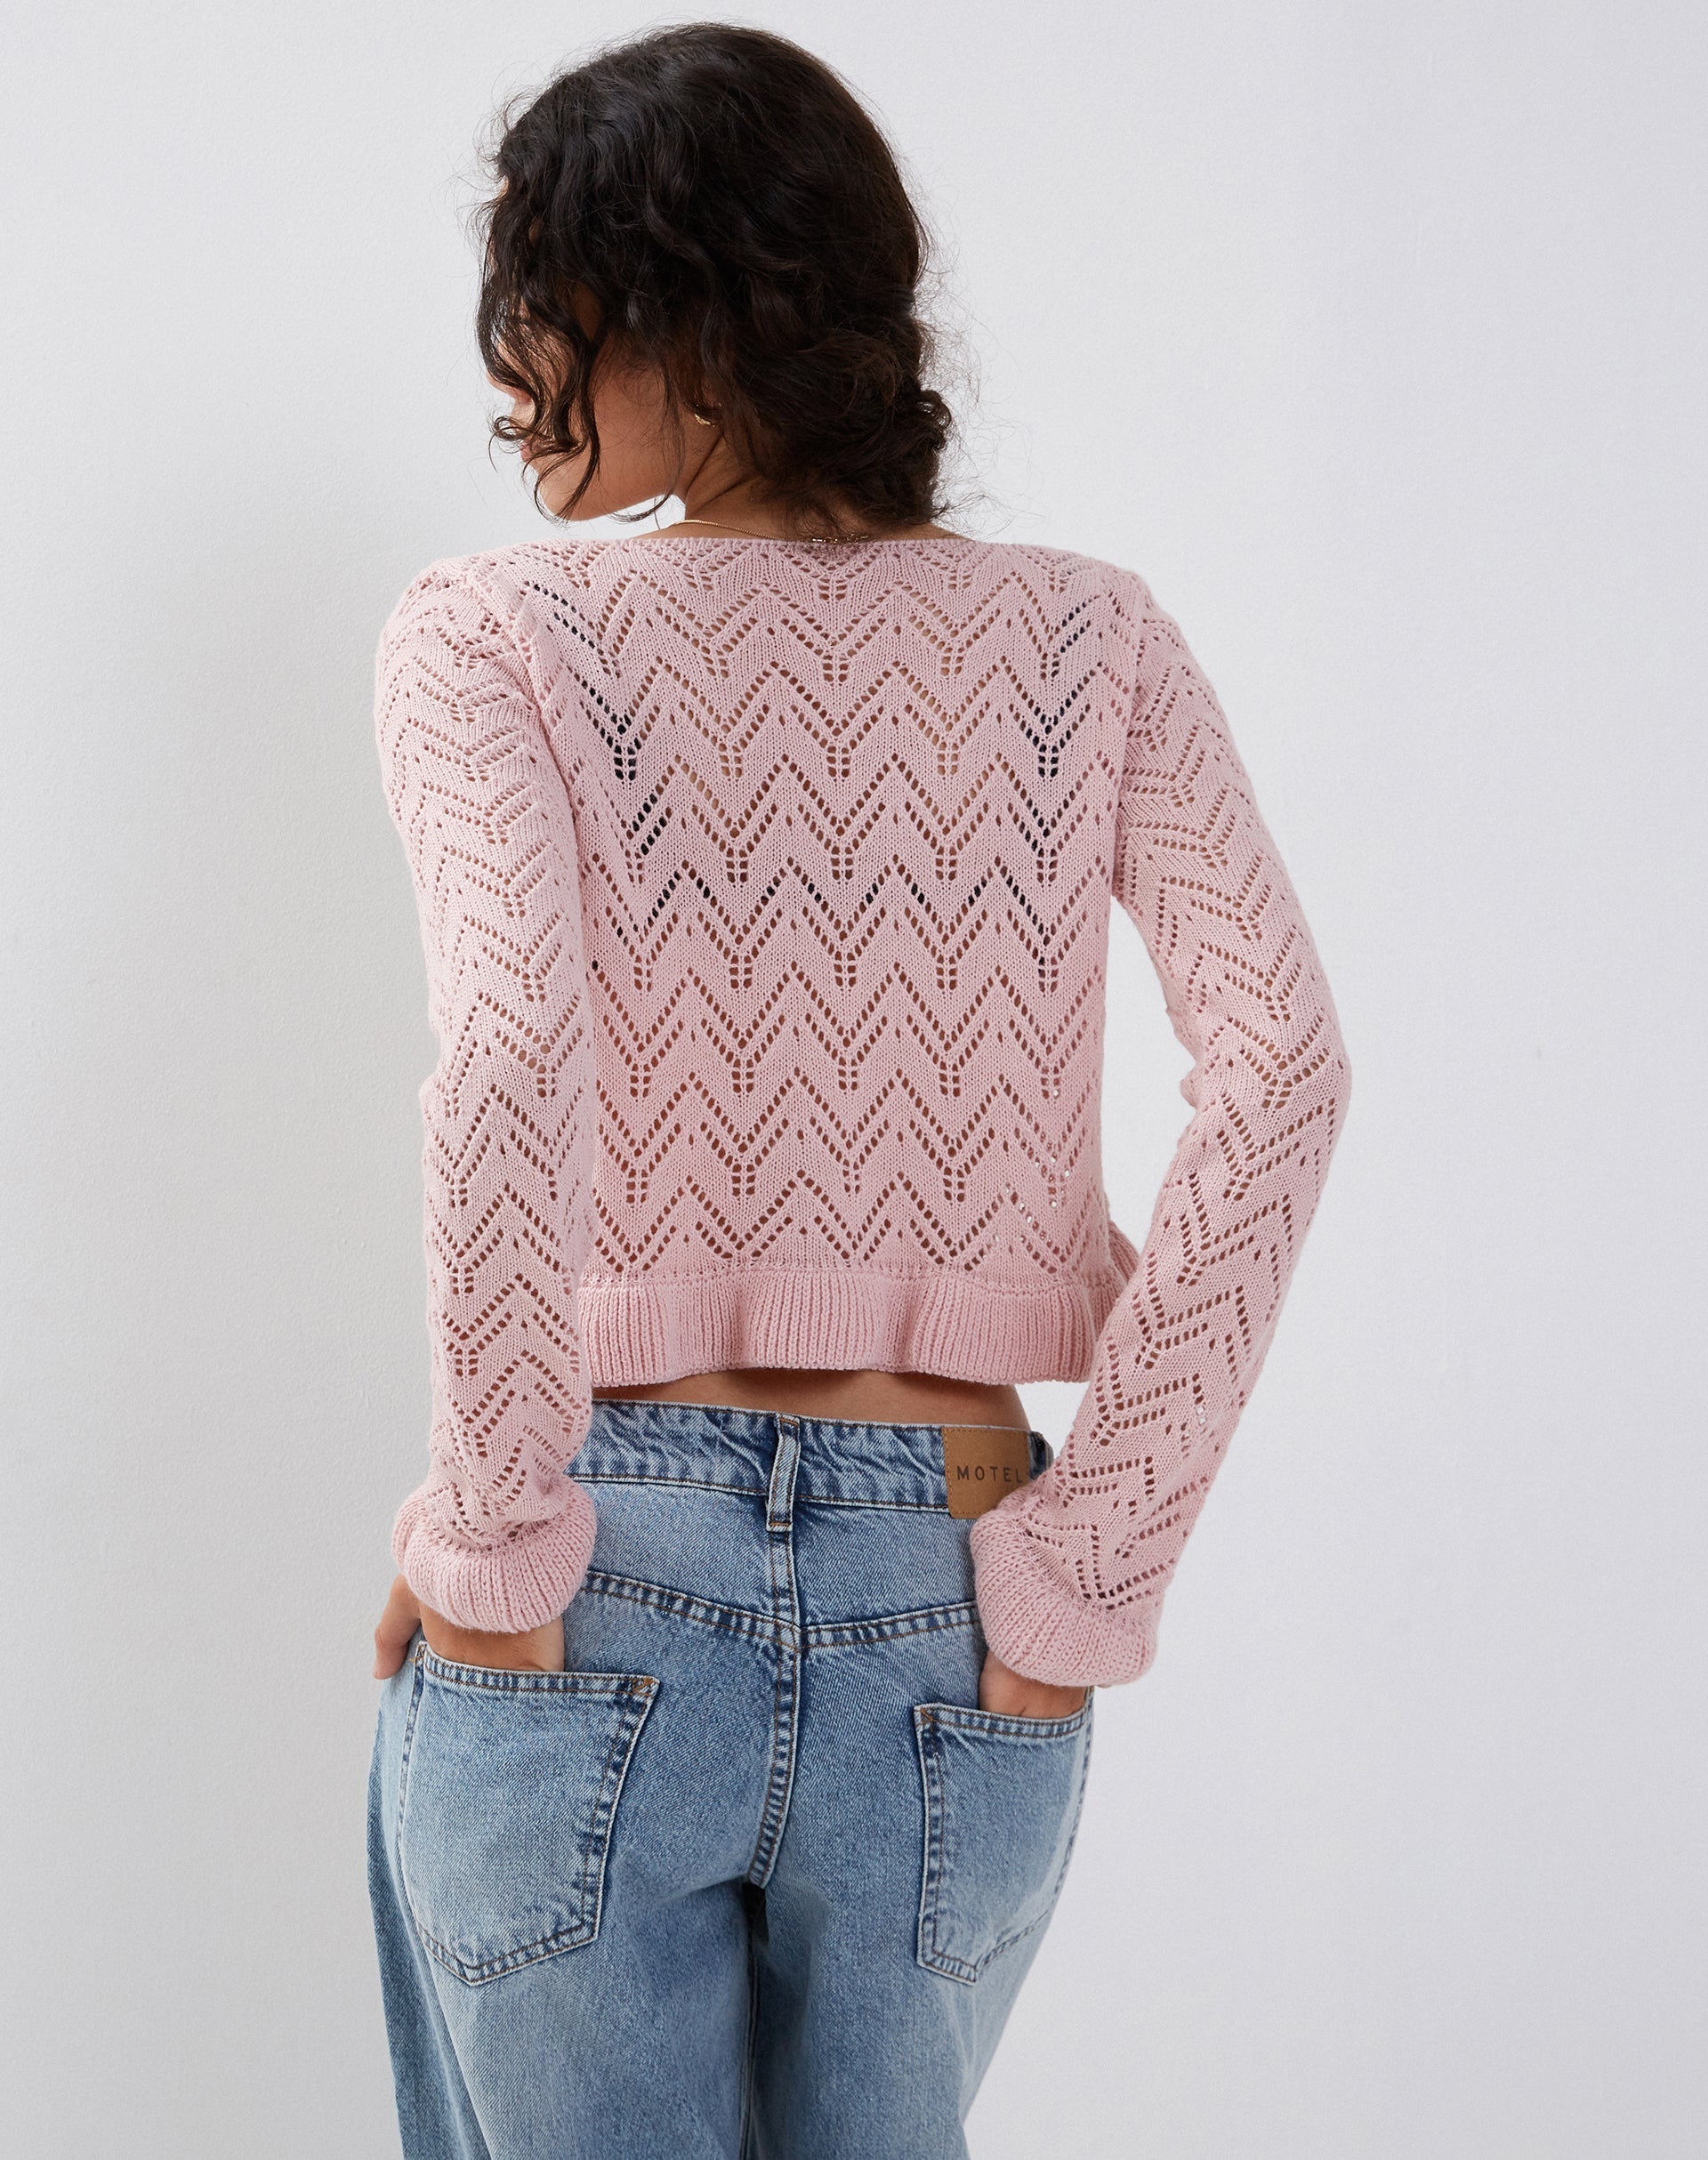 Vella Cardigan in Knitted Pink